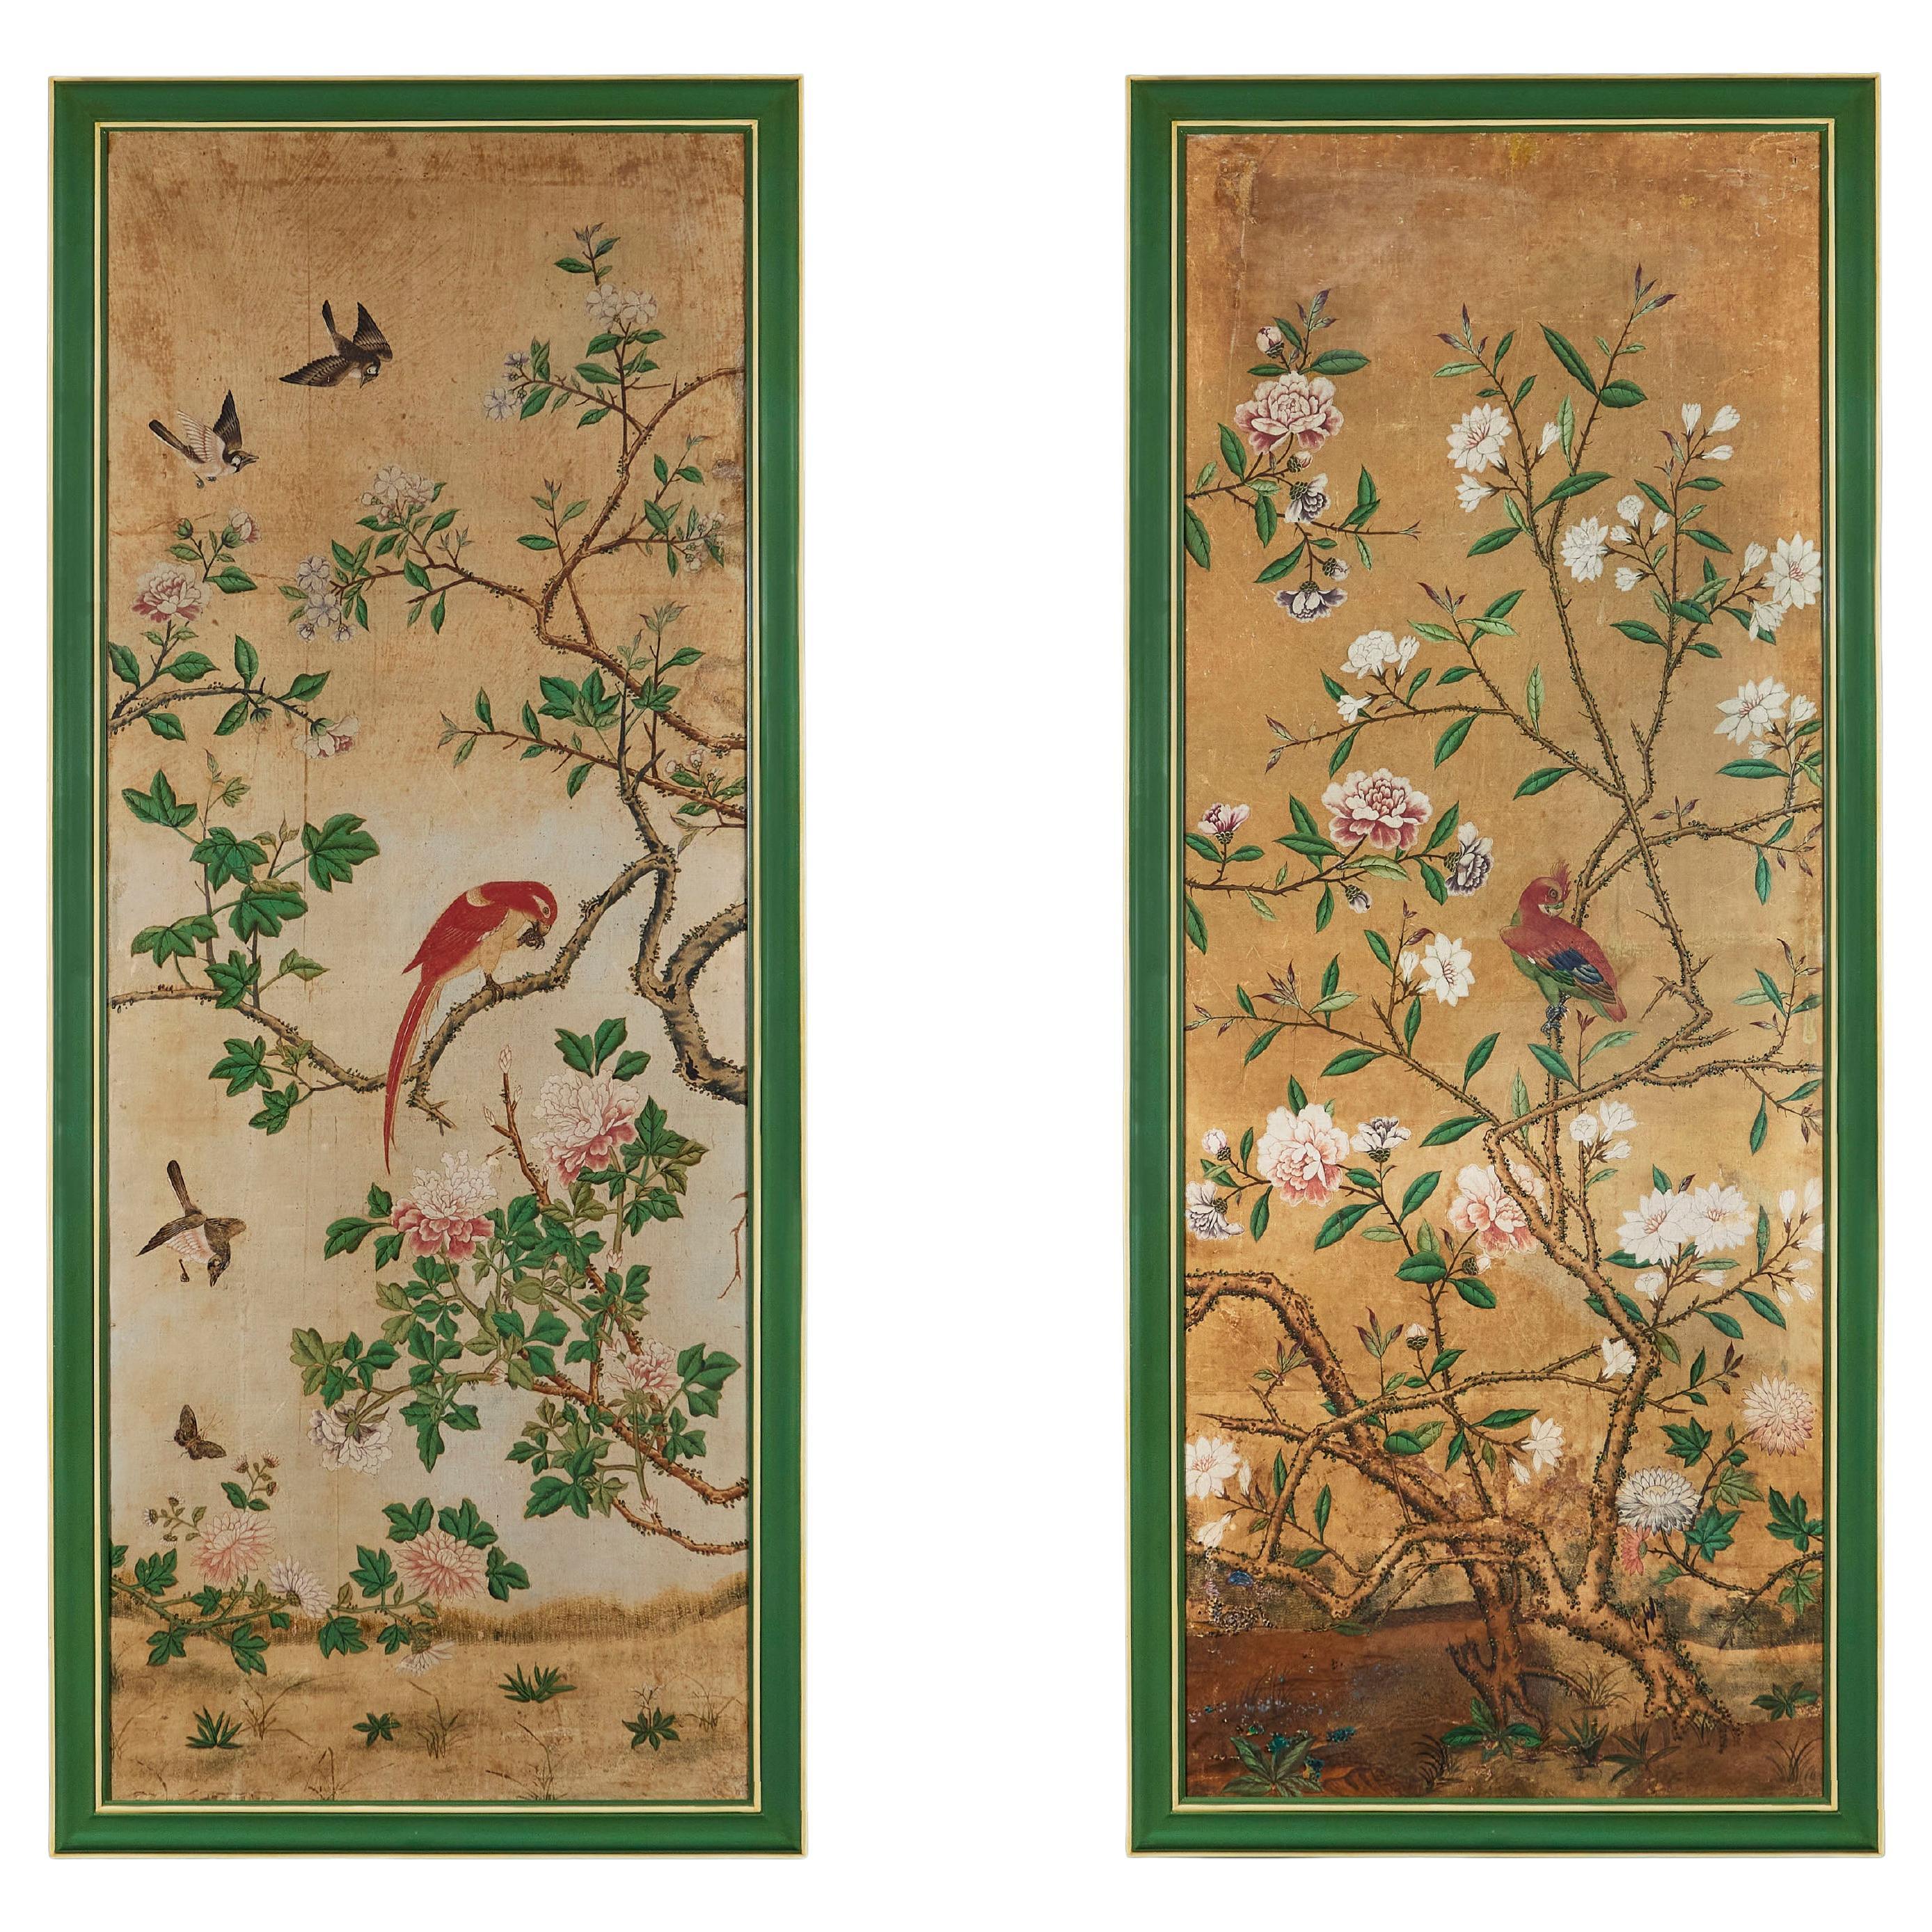 A Rare Pair of 18th Century Chinese Wallpaper Panels 